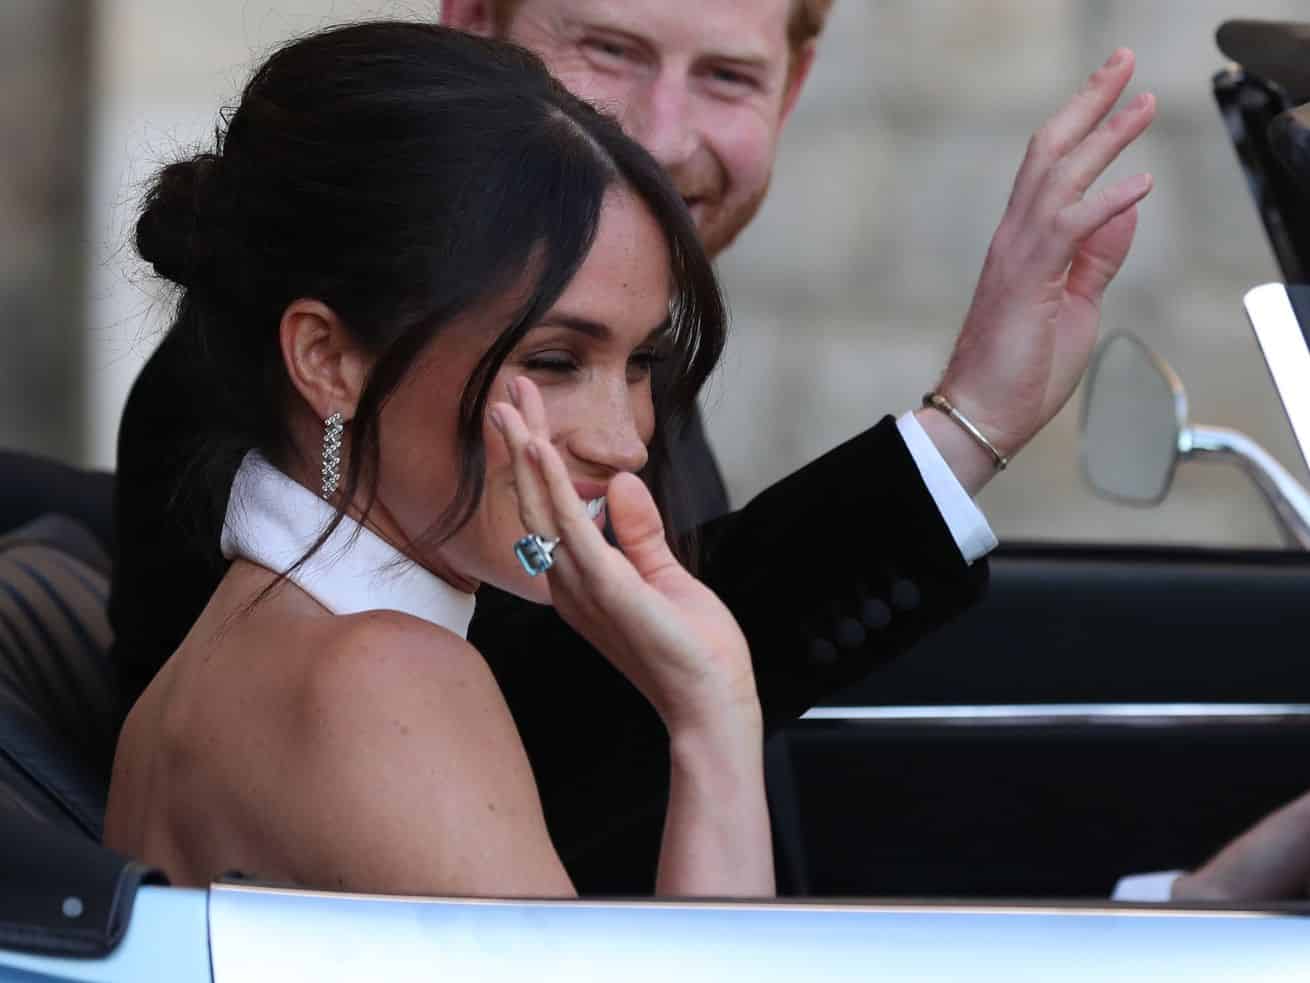 Harry, Meghan, and the ghost of Diana: “What I was seeing was history repeating itself”